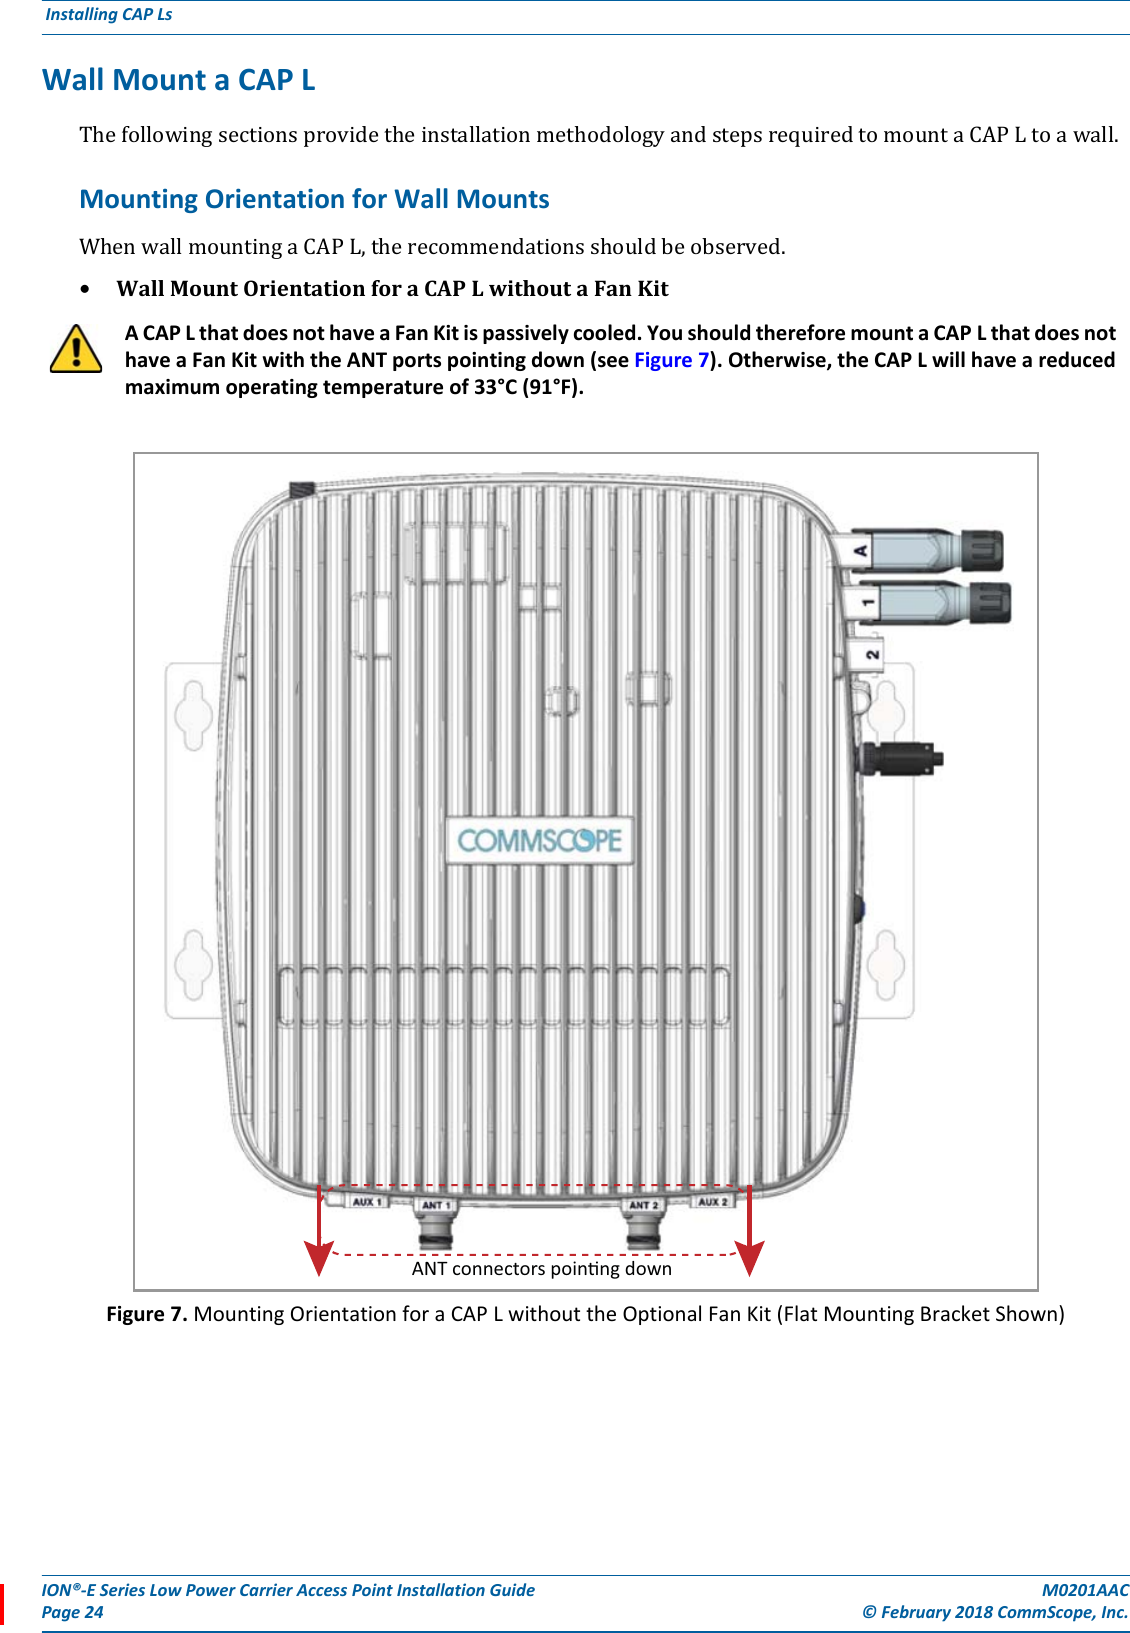 ION®-E Series Low Power Carrier Access Point Installation Guide M0201AACPage 24 © February 2018 CommScope, Inc. Installing CAP Ls  Wall Mount a CAP LThefollowingsectionsprovidetheinstallationmethodologyandstepsrequiredtomountaCAPLtoawall.Mounting Orientation for Wall MountsWhenwallmountingaCAPL,therecommendationsshouldbeobserved.•WallMountOrientationforaCAPLwithoutaFanKitFigure 7. Mounting Orientation for a CAP L without the Optional Fan Kit (Flat Mounting Bracket Shown)A CAP L that does not have a Fan Kit is passively cooled. You should therefore mount a CAP L that does not have a Fan Kit with the ANT ports pointing down (see Figure 7). Otherwise, the CAP L will have a reduced maximum operating temperature of 33°C (91°F).ANT connectors poinng down